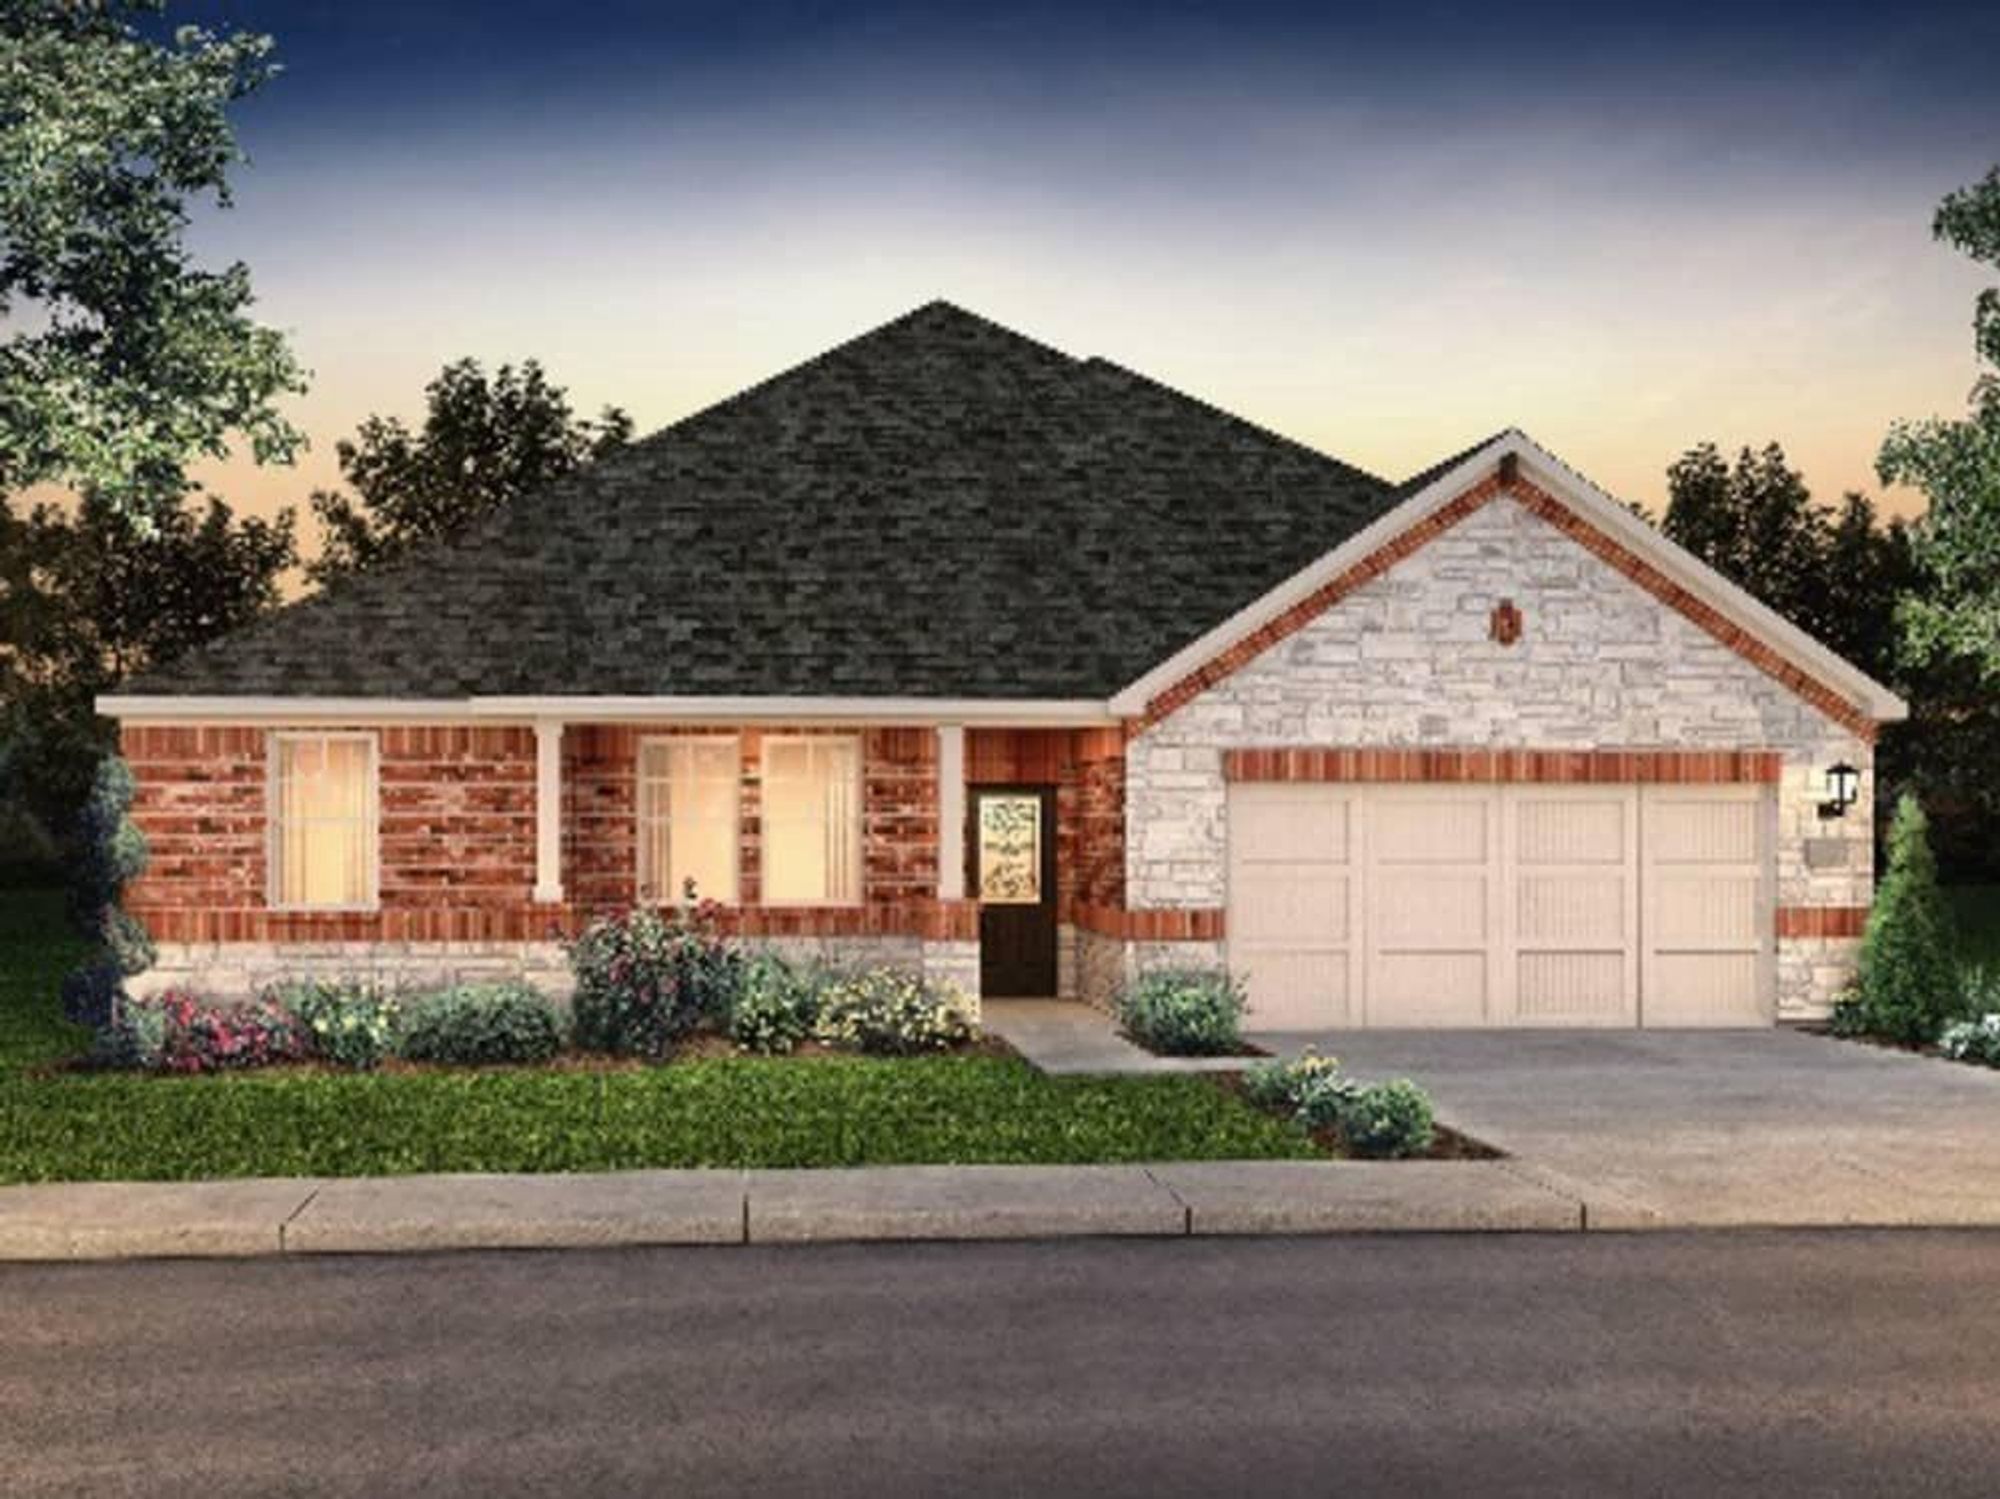 Wolf Creek Farms offers two series of homes including nine floorplans.